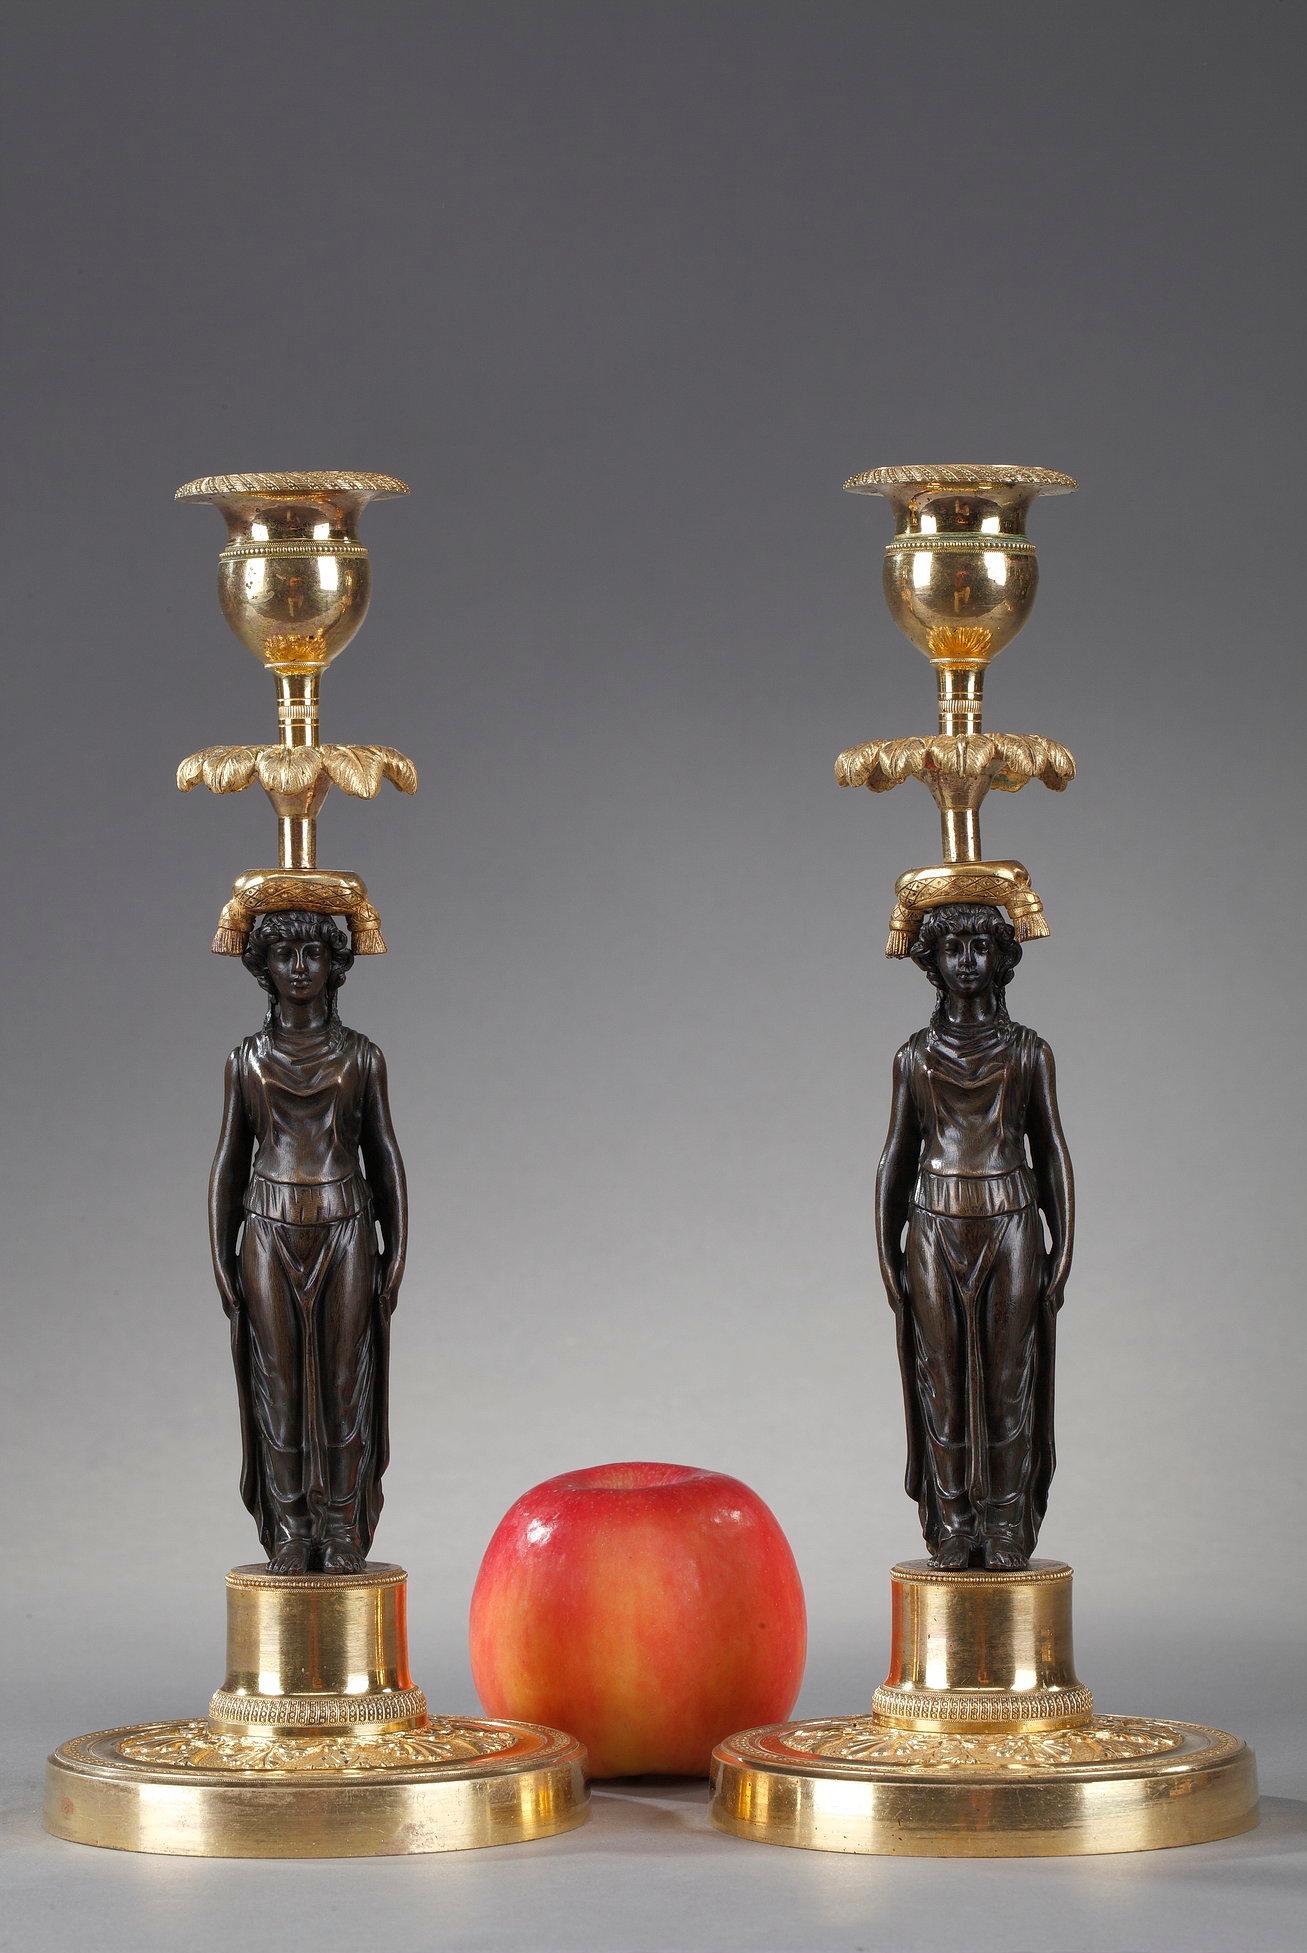 Pair of Charles X period torches in patinated and gilt bronze. The base is decorated with a border of palmettes and lotus. The shaft is decorated with caryatids representing vestals dressed in ancient tunics with their hair tied in a turban. In the